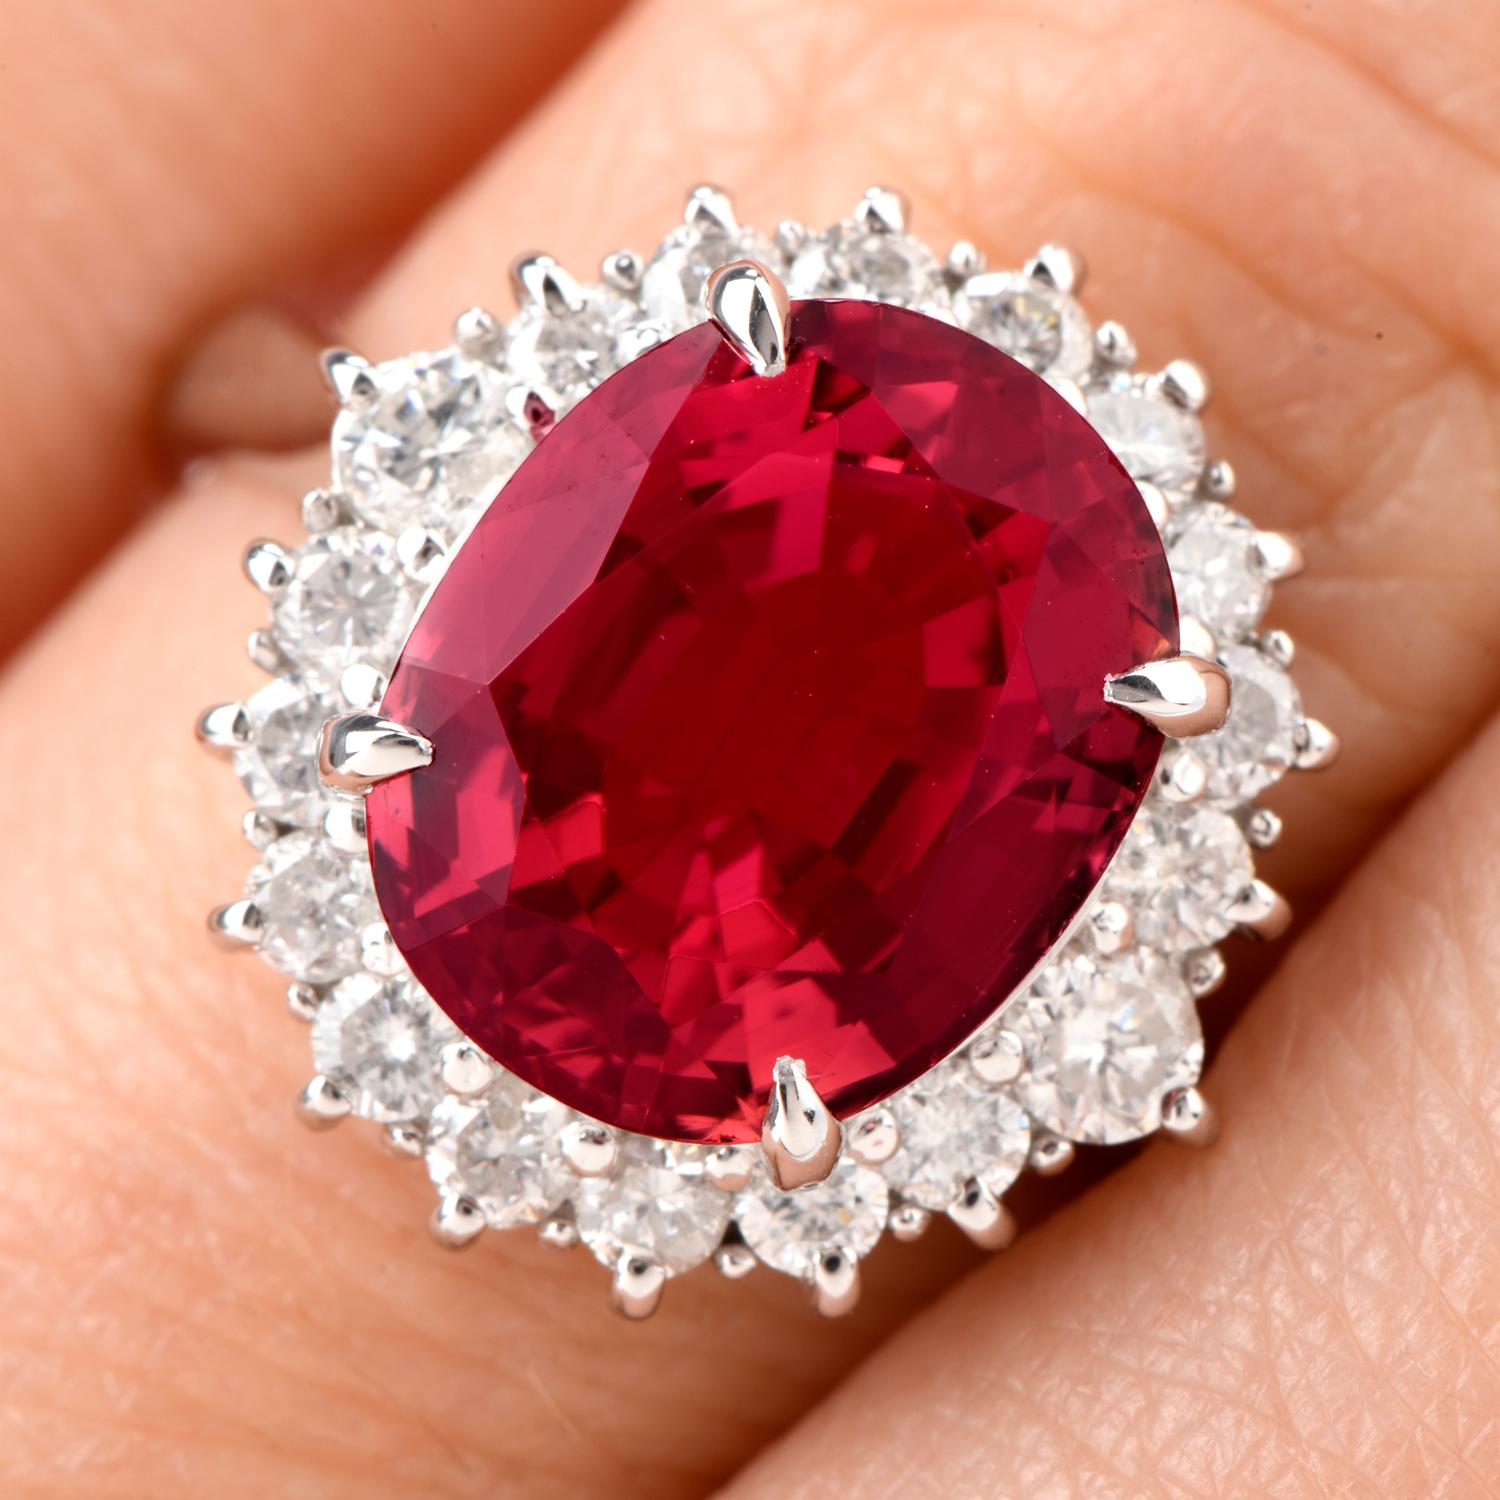 This Diamond and Pink Tourmaline ring comes with the versatility  of being worn as an engagement ring of color or a stately cocktail ring and was crafted in Platinum. Adorning the center is an oval shaped deep and rich colored Pink Tourmaline